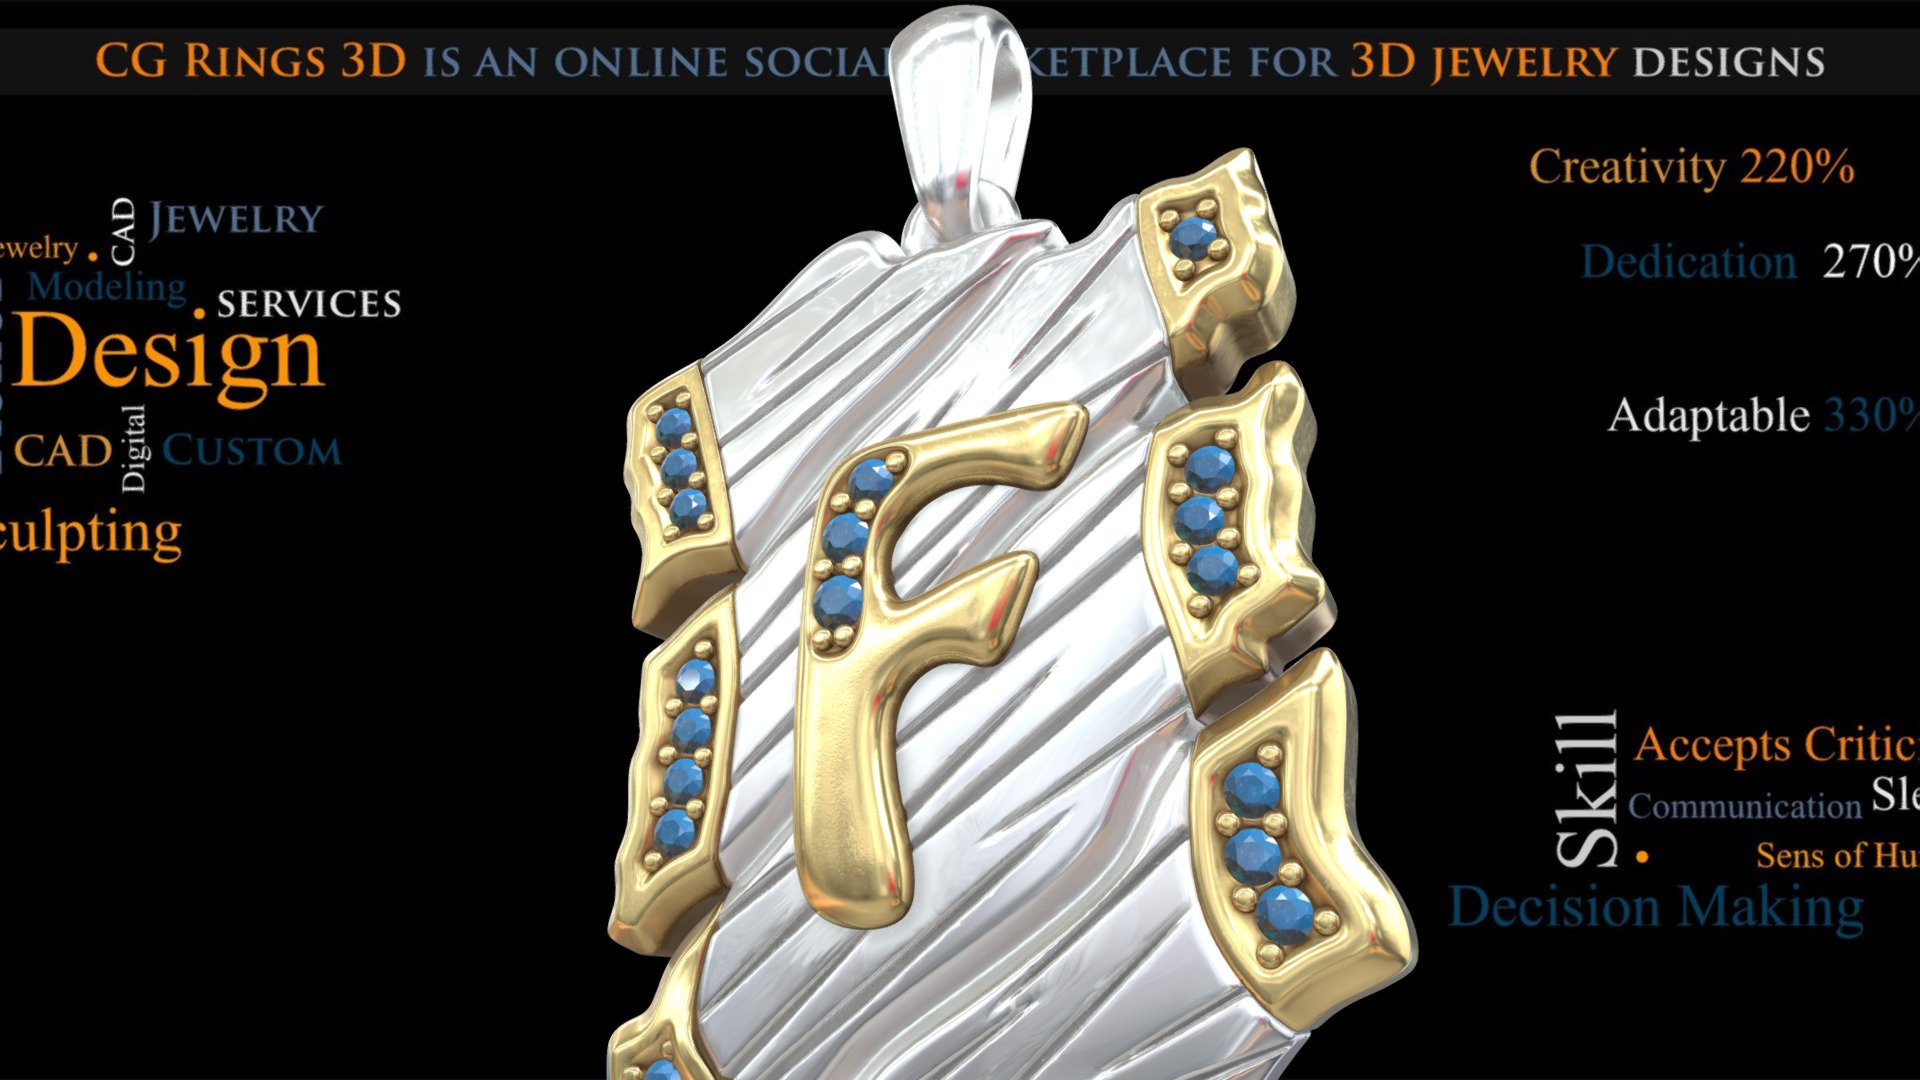 Jewelry made by 3D Designer Babut Florin Valentin

The 3D CAD model (3dm.Stl.Obj.) is ready for prototyping on any 3D printer.

Check out our website for more technical information !

https://cgrings3d.com/en/home/1209-pendant-with-letter-f-3d-cad.html

Please feel free to contact us at anytime. We would love to hear from you and will do our best to live up to your expectations!

e-mail: cgrings3d@gmail.com - Jewelry. Pendant With Letter F - 3D CAD - Buy Royalty Free 3D model by CGRings3D - Jewelry 3D CAD (@cgrings3d) 3d model